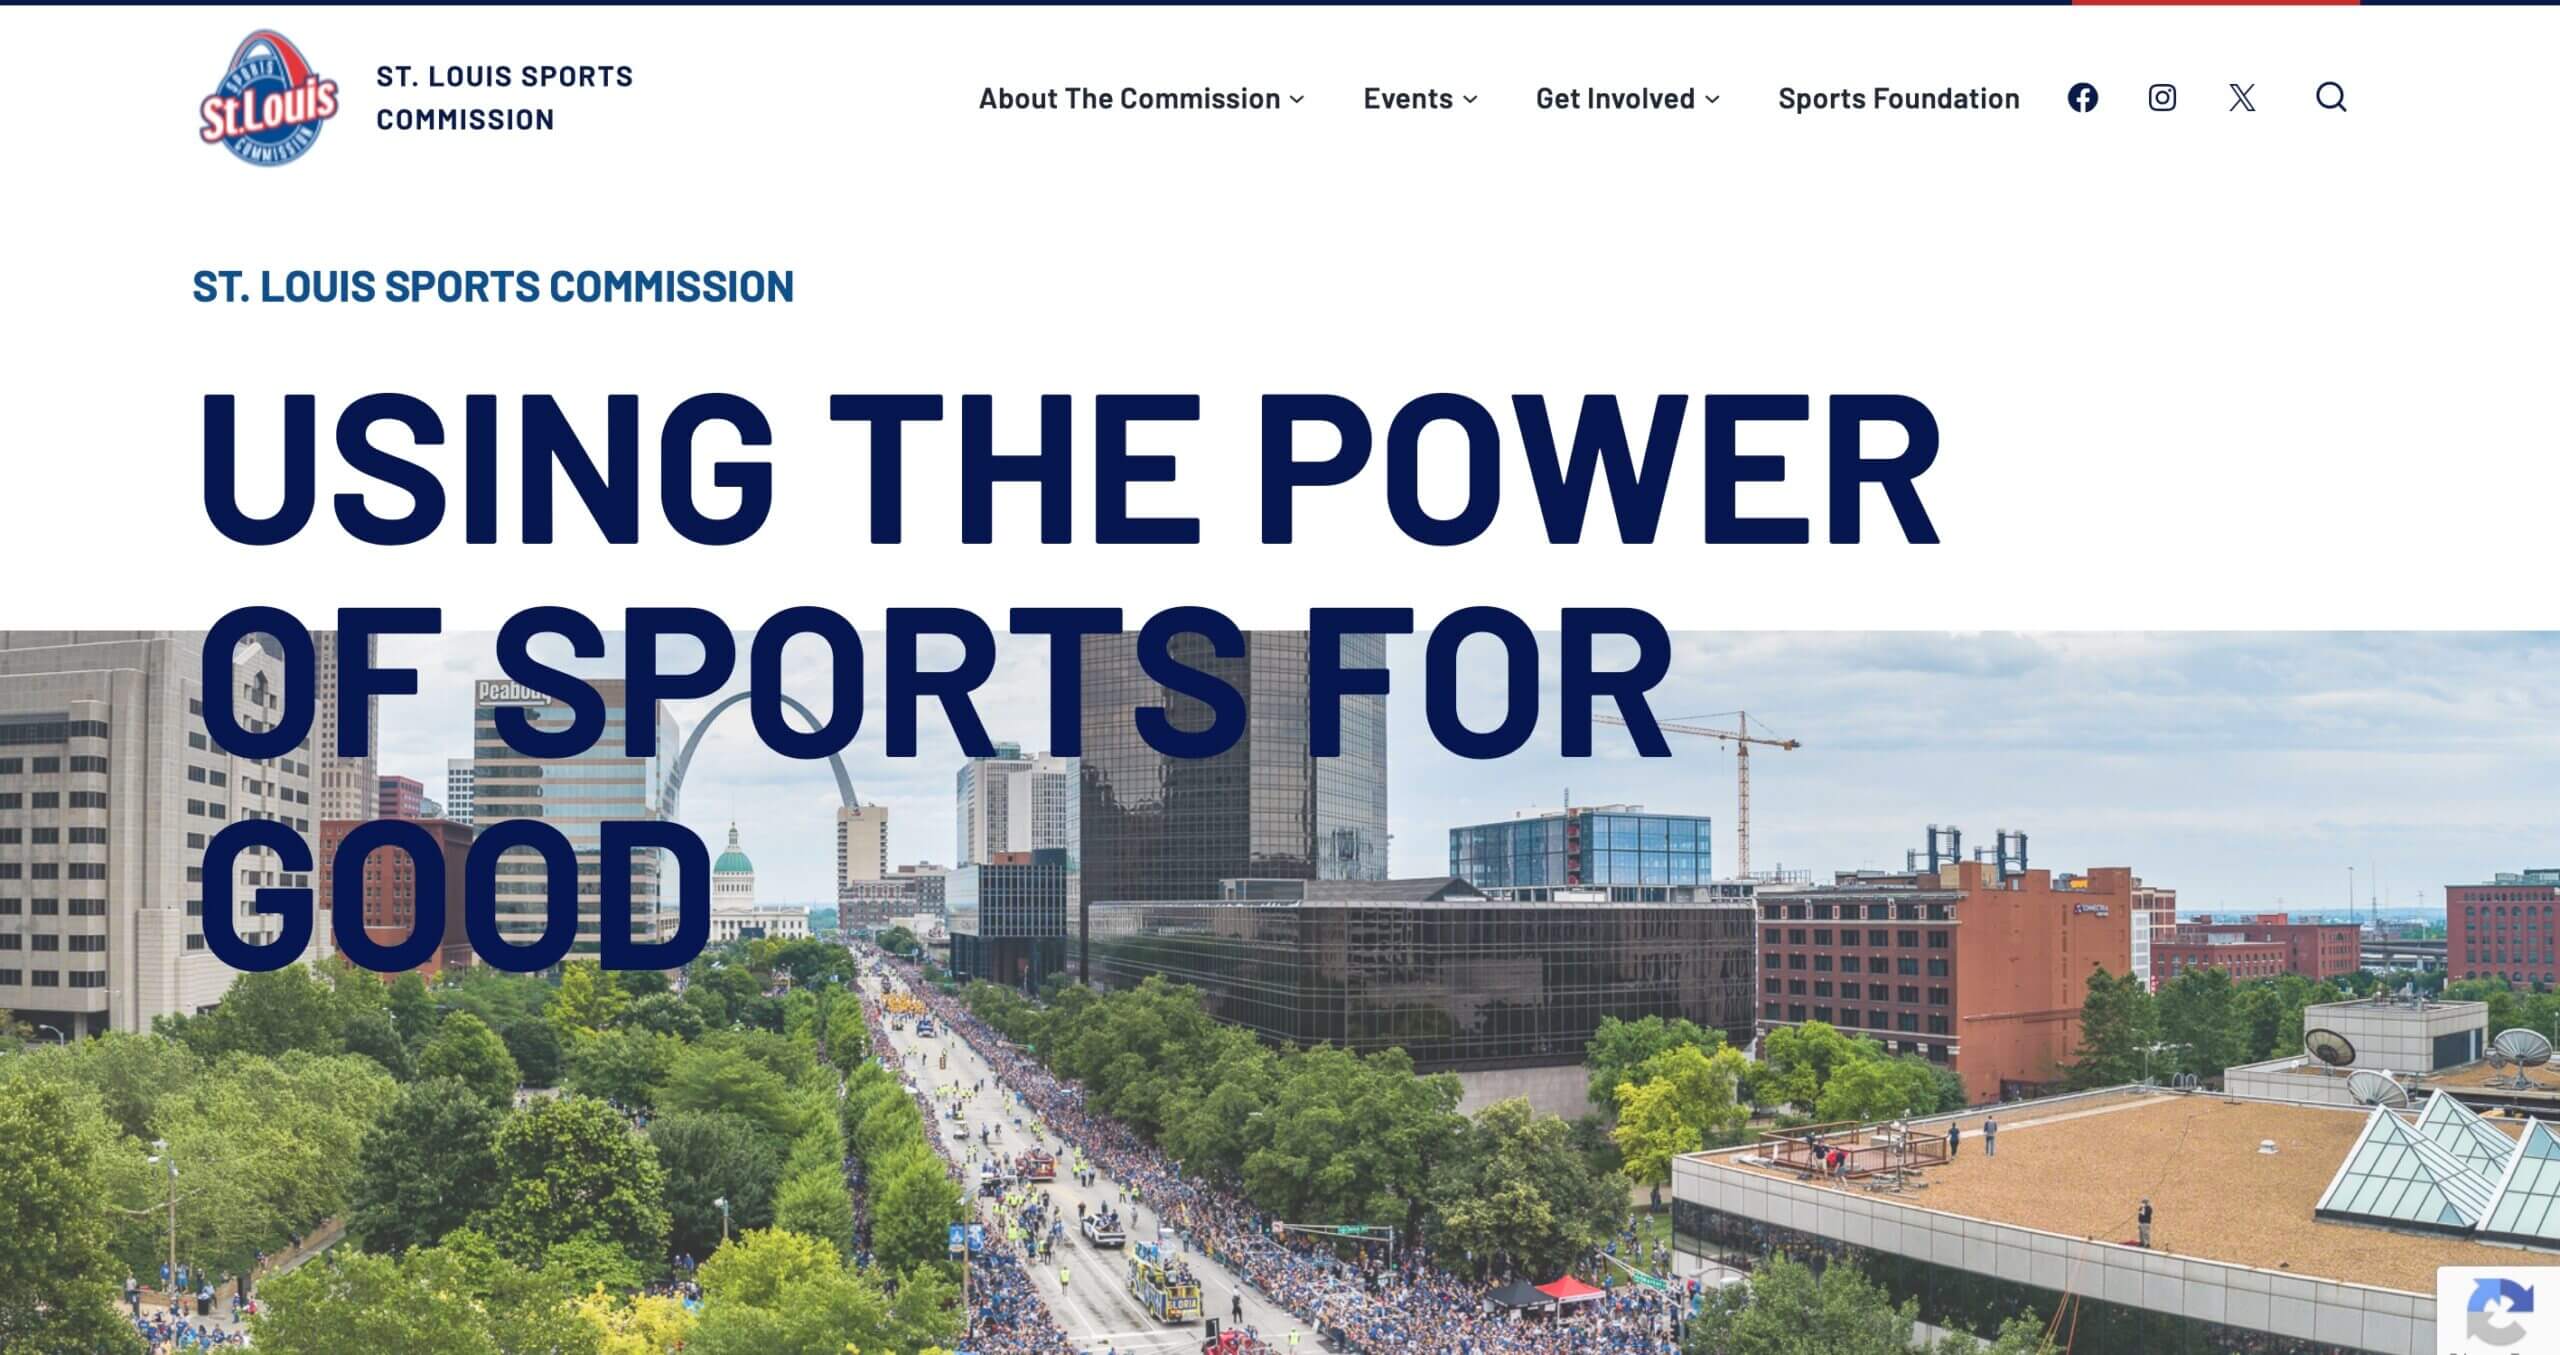 The image displays a website banner for the St. Louis Sports Commission with a slogan and a crowded city street scene below during a sporting event.